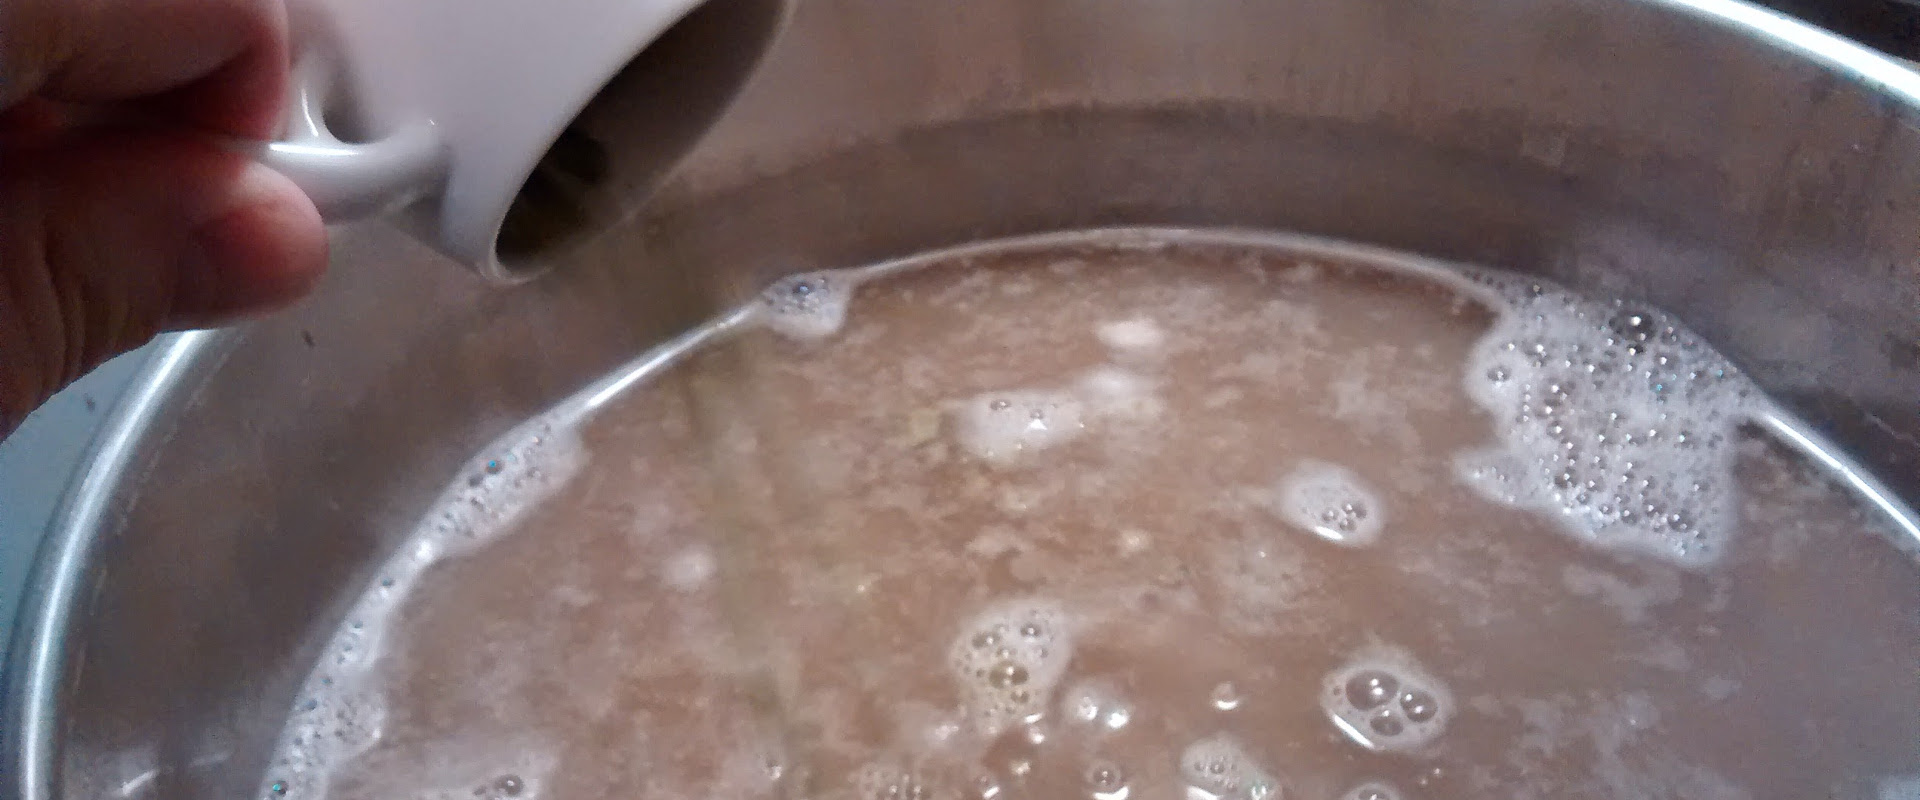 Adding hops to a kettle of wort